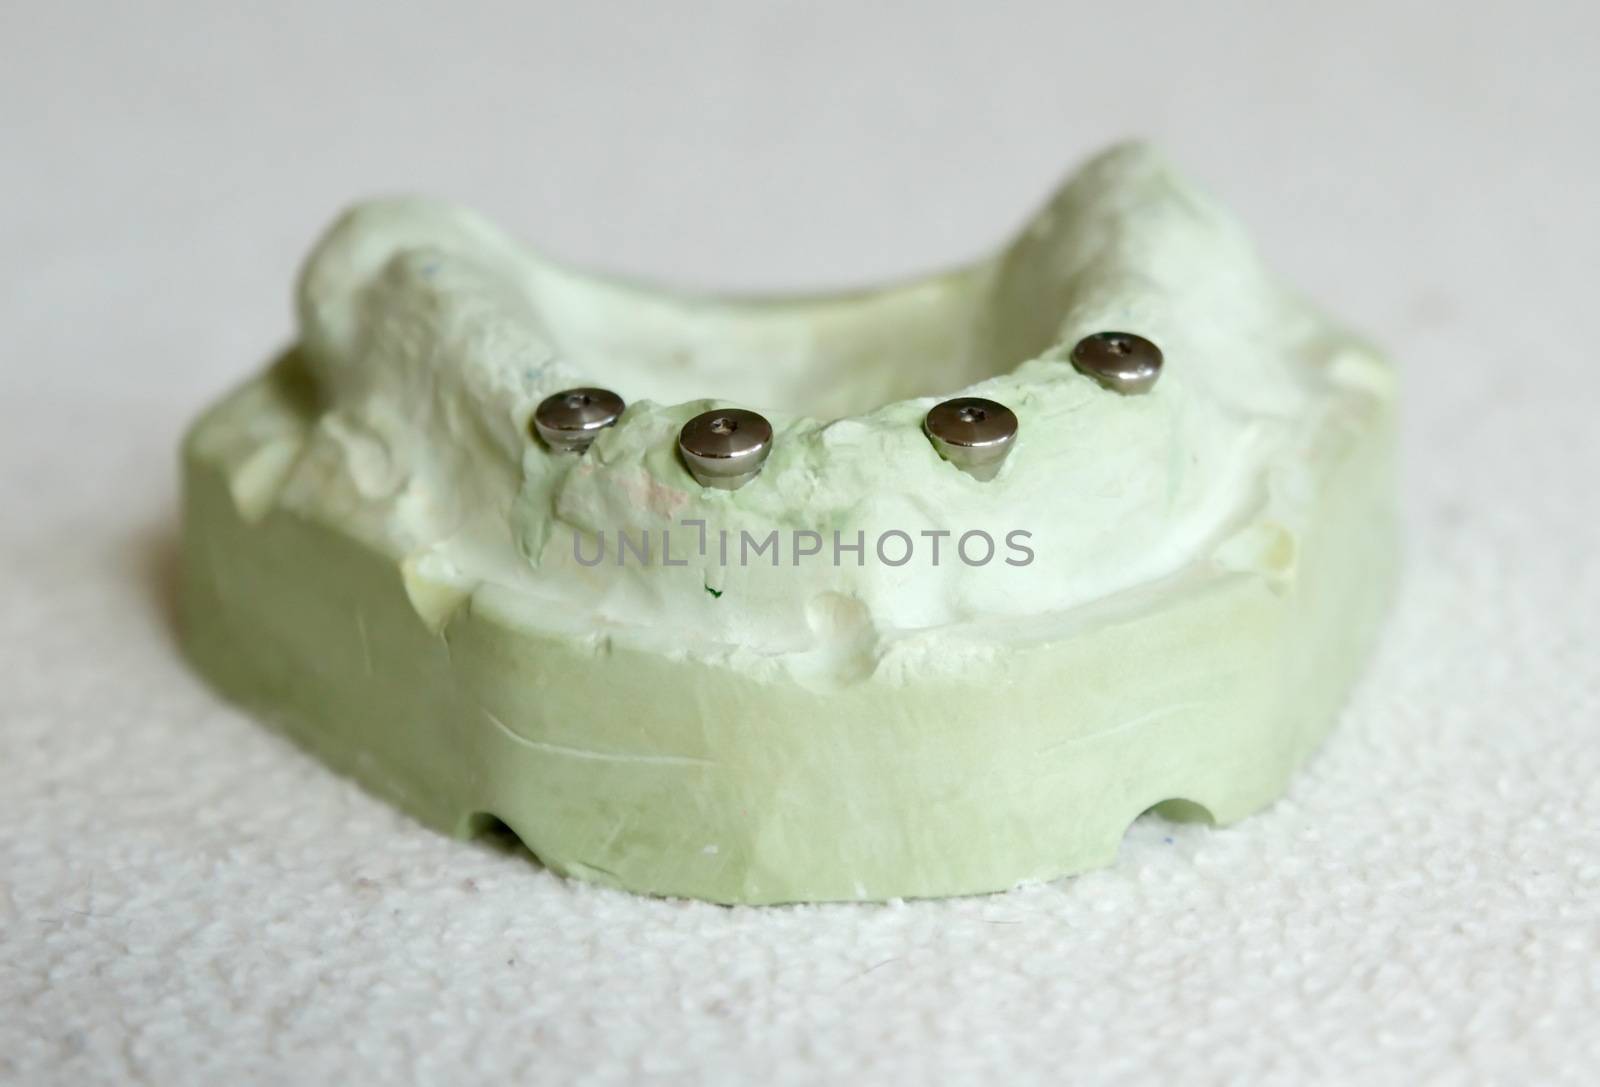 Cast model with four implant preparations by Elenaphotos21